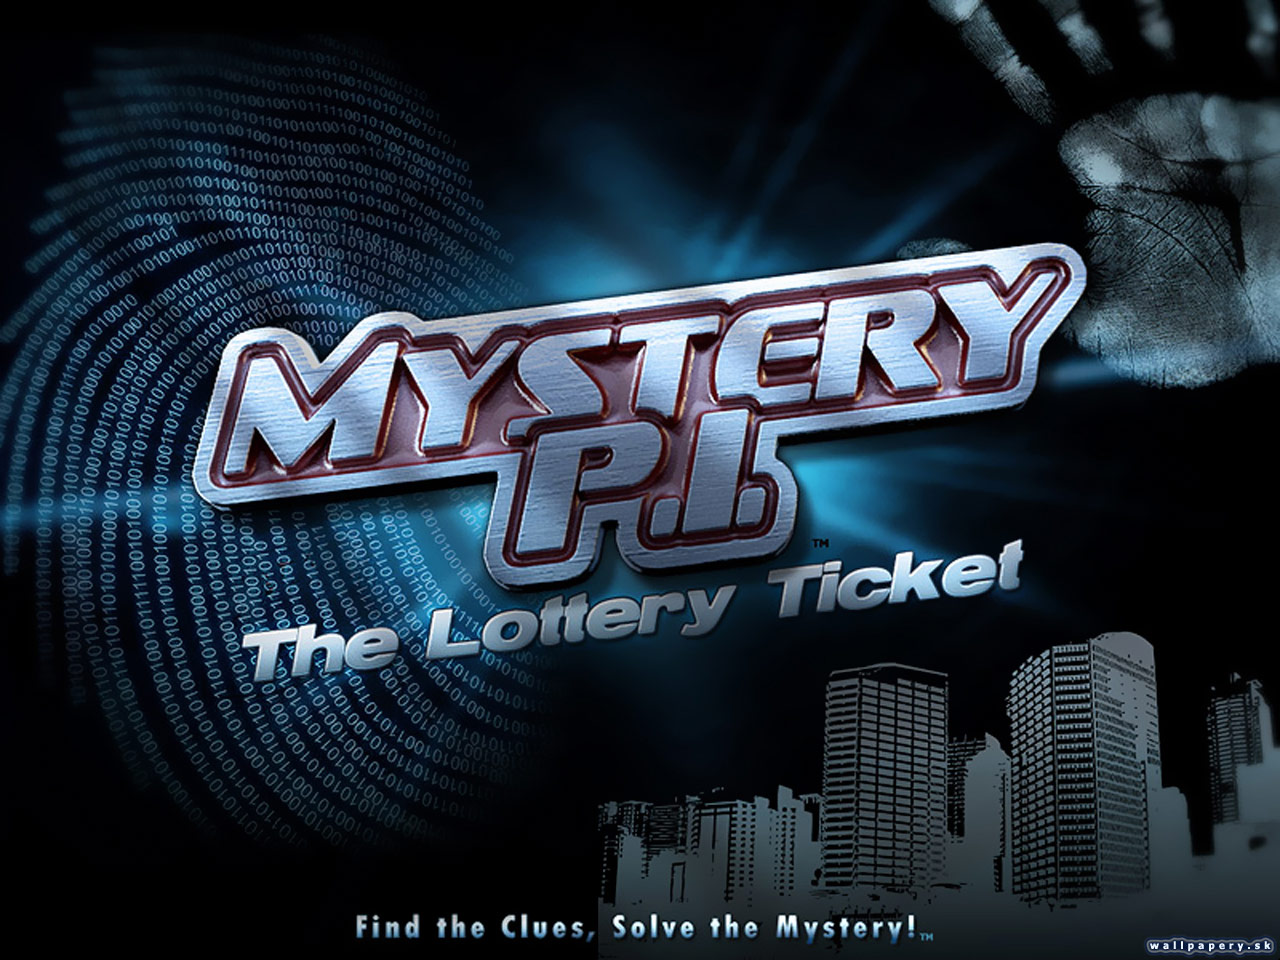 Mystery P.I. - The Lottery Ticket - wallpaper 1